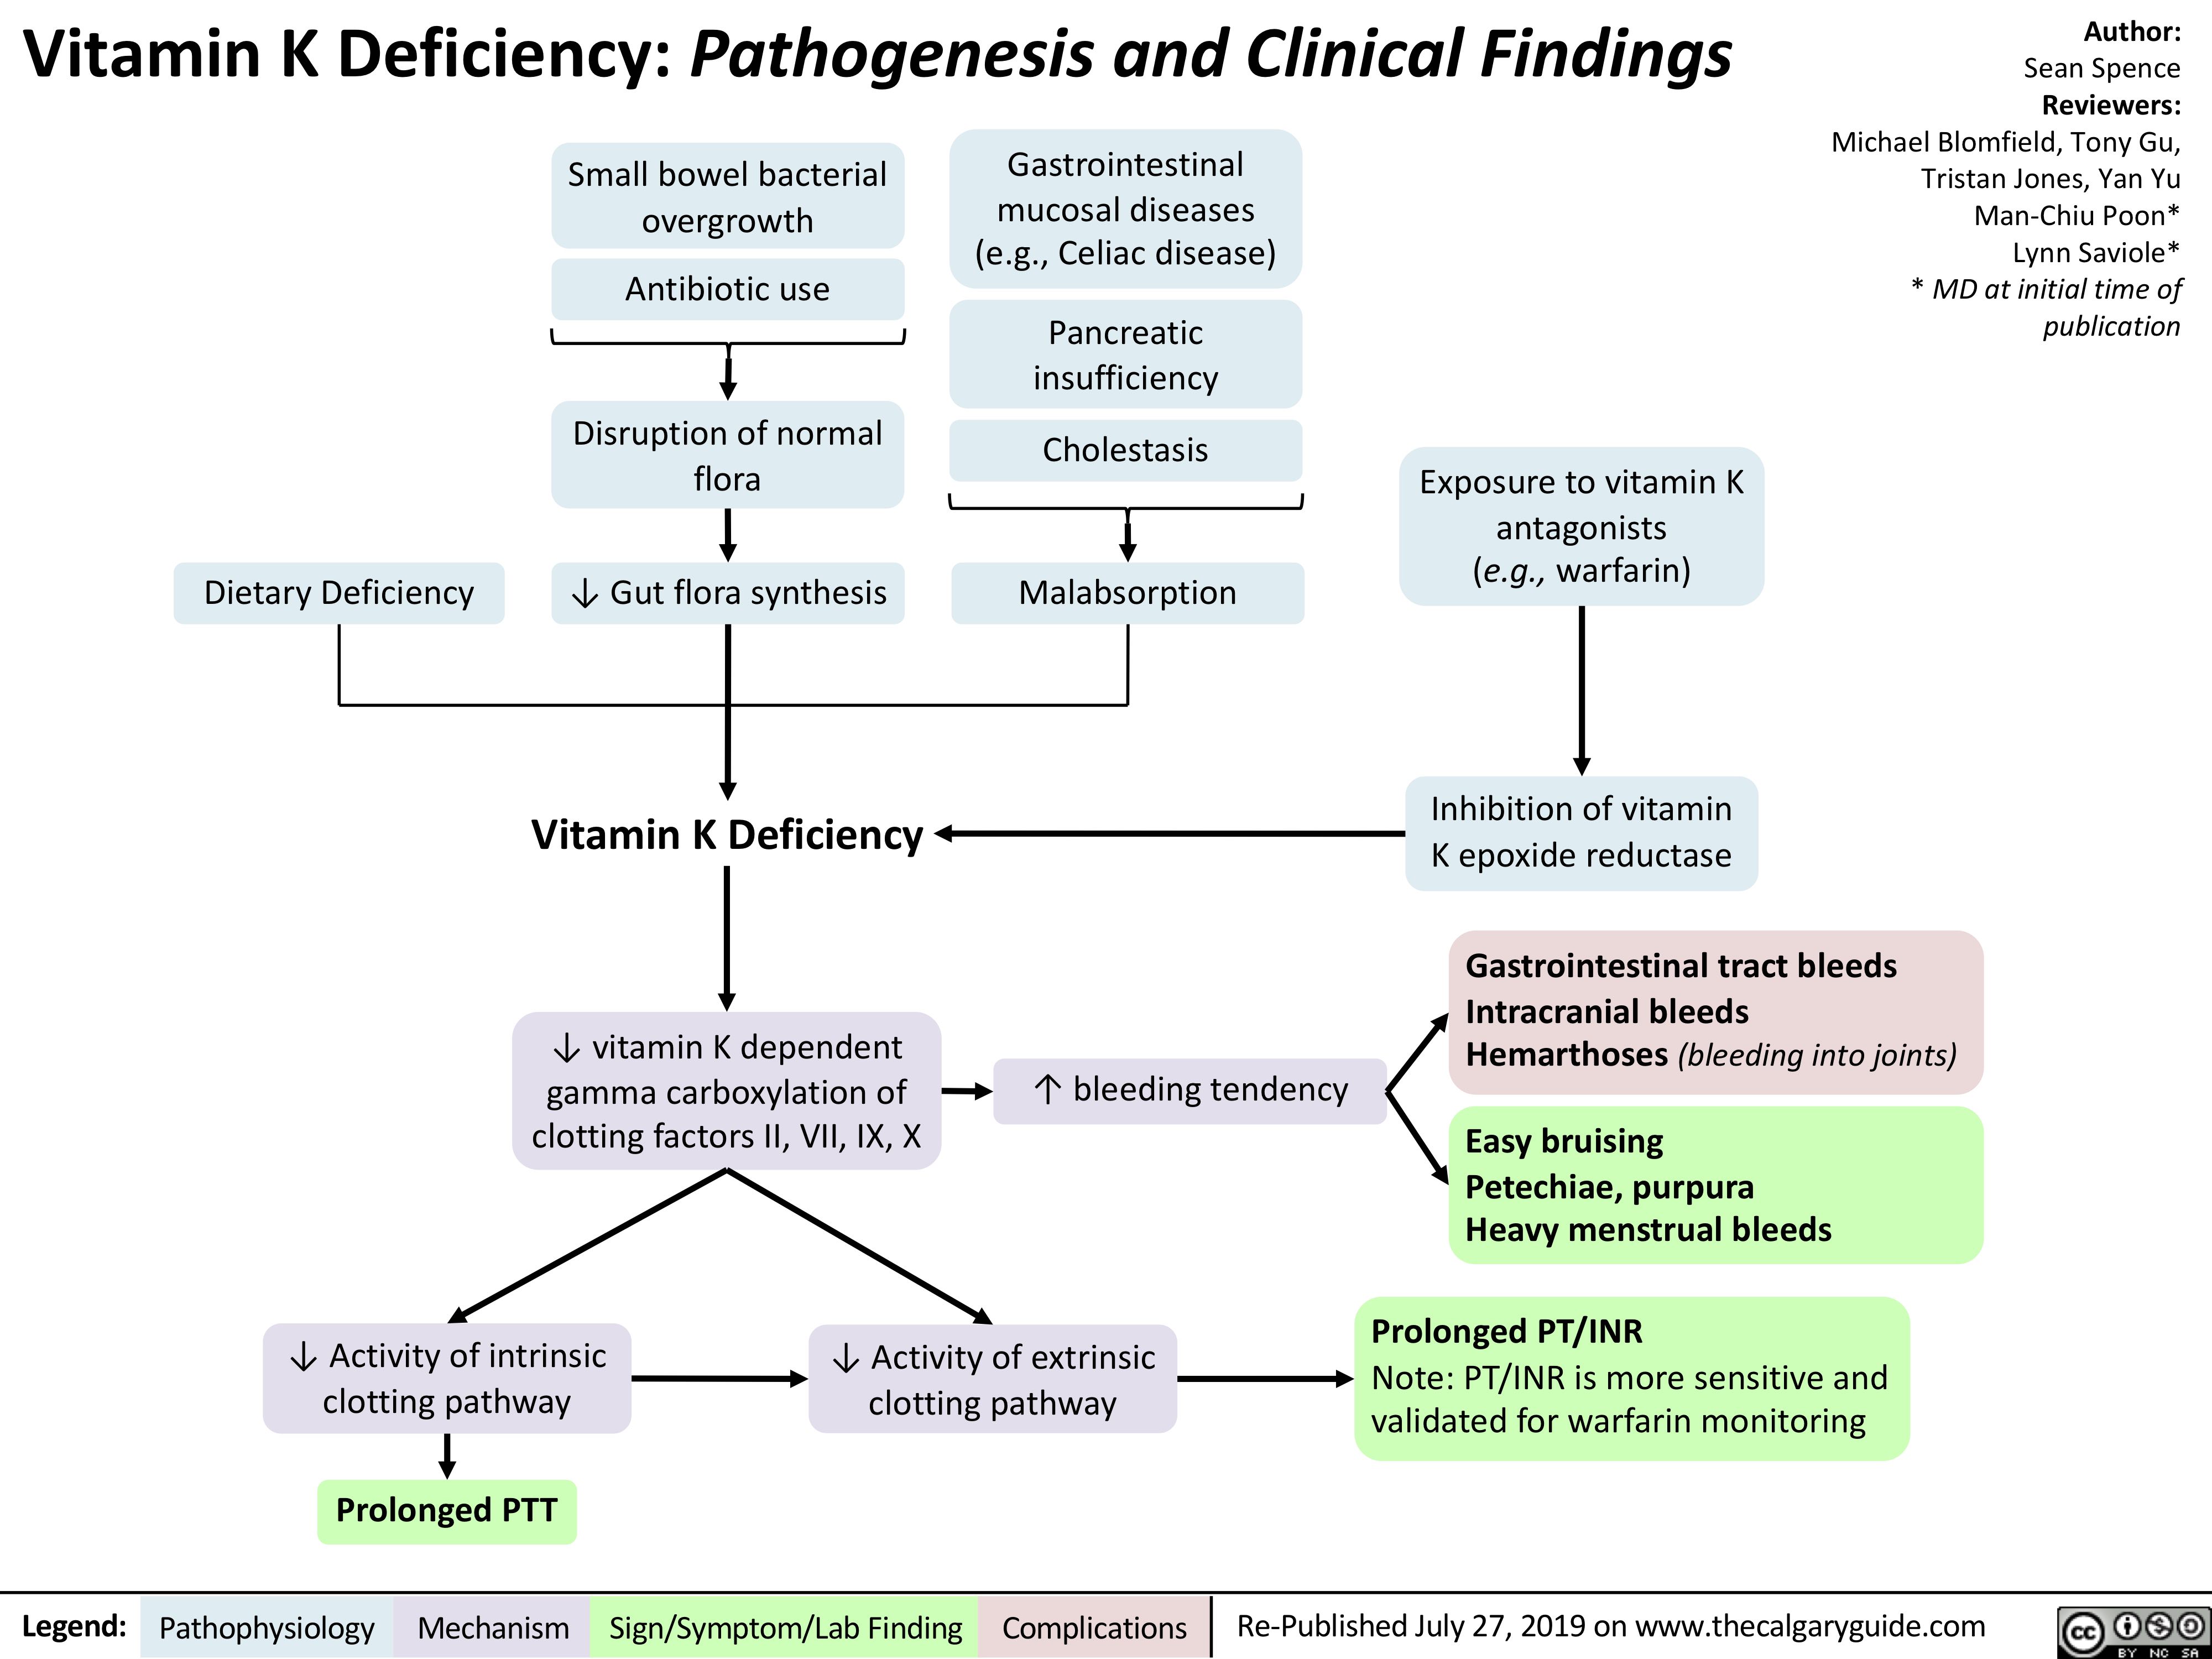 Vitamin K Deficiency: Pathogenesis and Clinical Findings
Author:
Sean Spence
Reviewers:
Michael Blomfield, Tony Gu, Tristan Jones, Yan Yu Man-Chiu Poon* Lynn Saviole* * MD at initial time of publication
             Dietary Deficiency
Small bowel bacterial overgrowth
Antibiotic use
Disruption of normal flora
↓ Gut flora synthesis
Vitamin K Deficiency
↓ vitamin K dependent gamma carboxylation of clotting factors II, VII, IX, X
Gastrointestinal mucosal diseases (e.g., Celiac disease)
Pancreatic insufficiency
Cholestasis
Malabsorption
Exposure to vitamin K antagonists (e.g., warfarin)
Inhibition of vitamin K epoxide reductase
          ↑ bleeding tendency
Gastrointestinal tract bleeds Intracranial bleeds Hemarthoses (bleeding into joints)
Easy bruising
Petechiae, purpura Heavy menstrual bleeds
Prolonged PT/INR
Note: PT/INR is more sensitive and validated for warfarin monitoring
        ↓ Activity of intrinsic clotting pathway
Prolonged PTT
↓ Activity of extrinsic clotting pathway
     Legend:
 Pathophysiology
Mechanism
 Sign/Symptom/Lab Finding
  Complications
Re-Published July 27, 2019 on www.thecalgaryguide.com
   